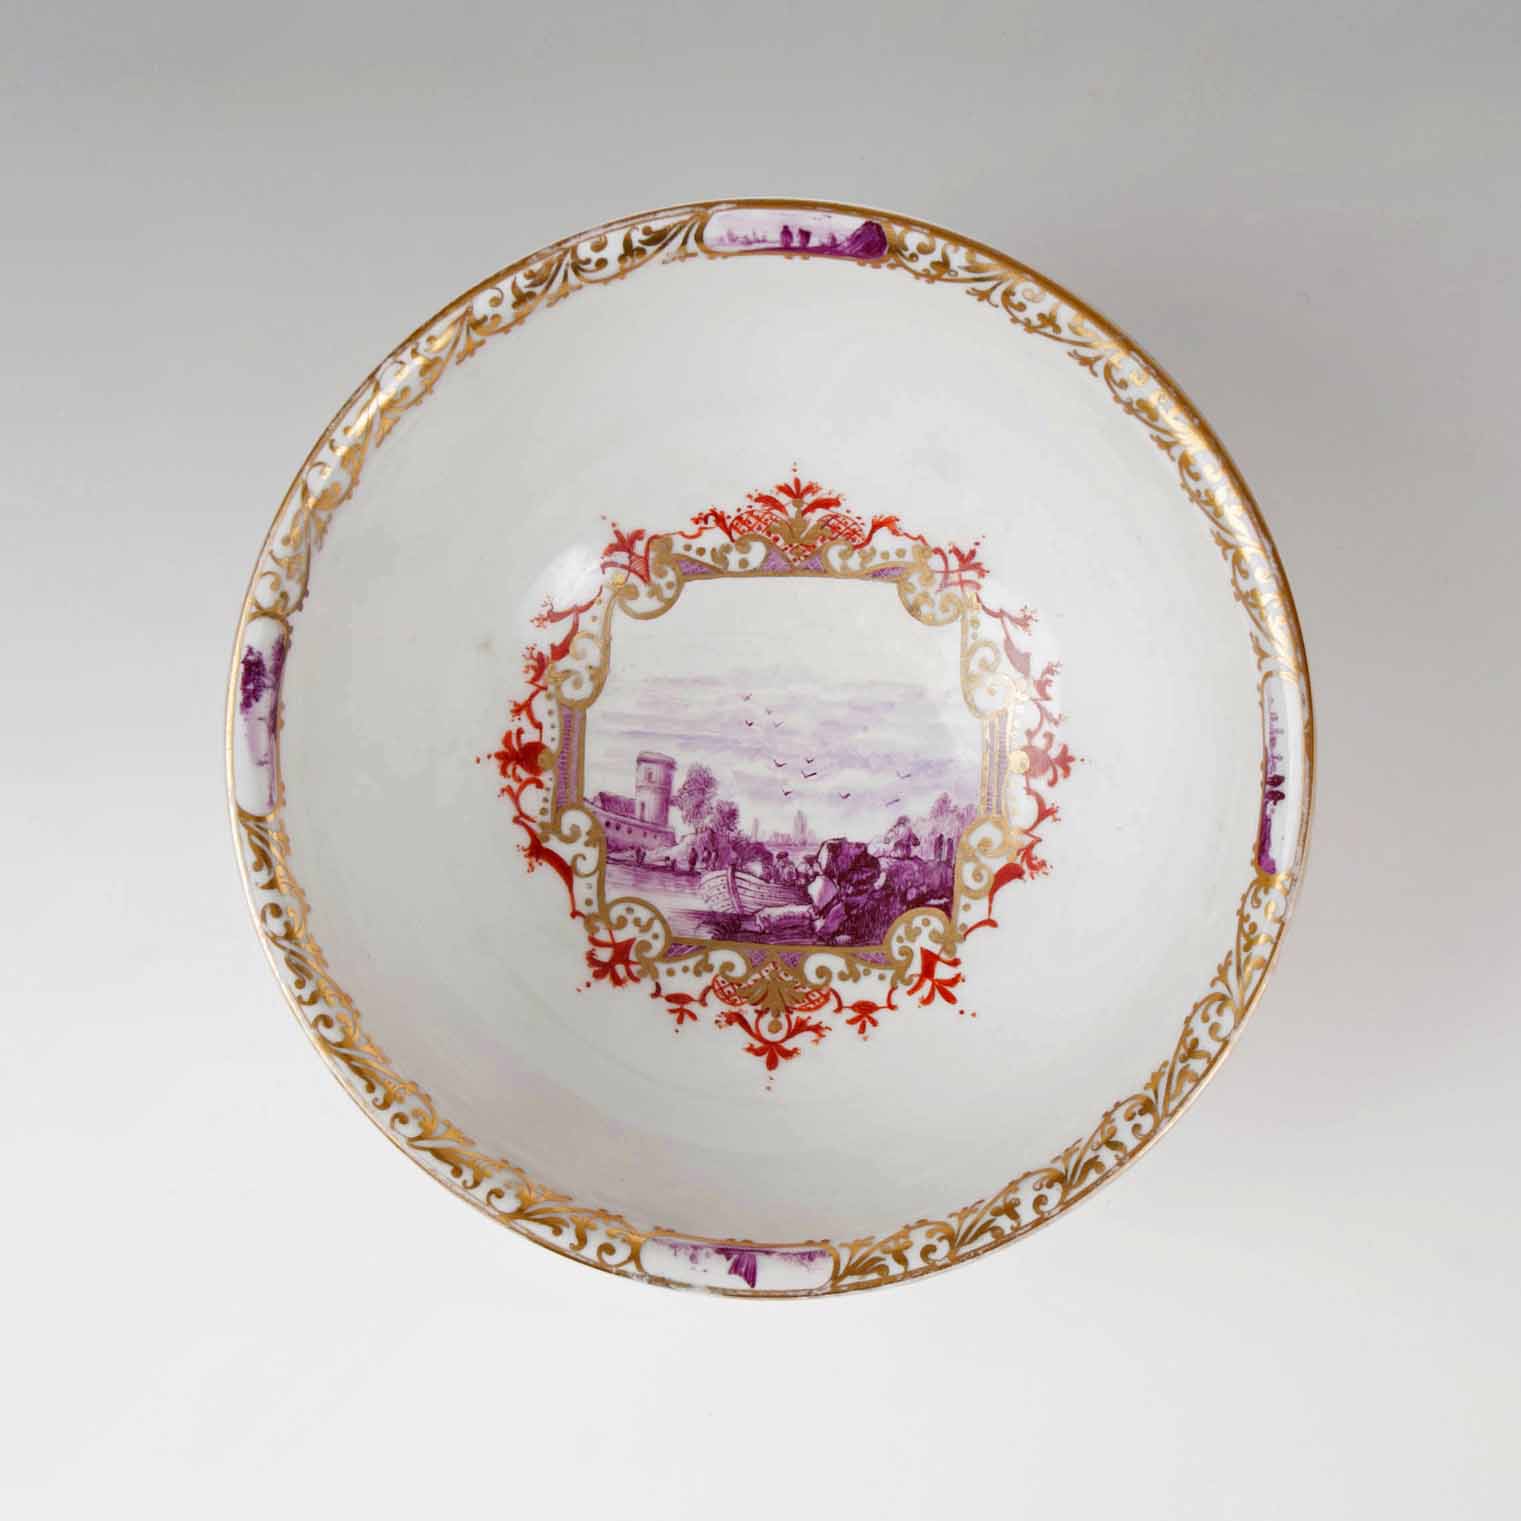 A bowl of museum-like quality with fine landscape decor in the styl of J.G.Heintze - image 3